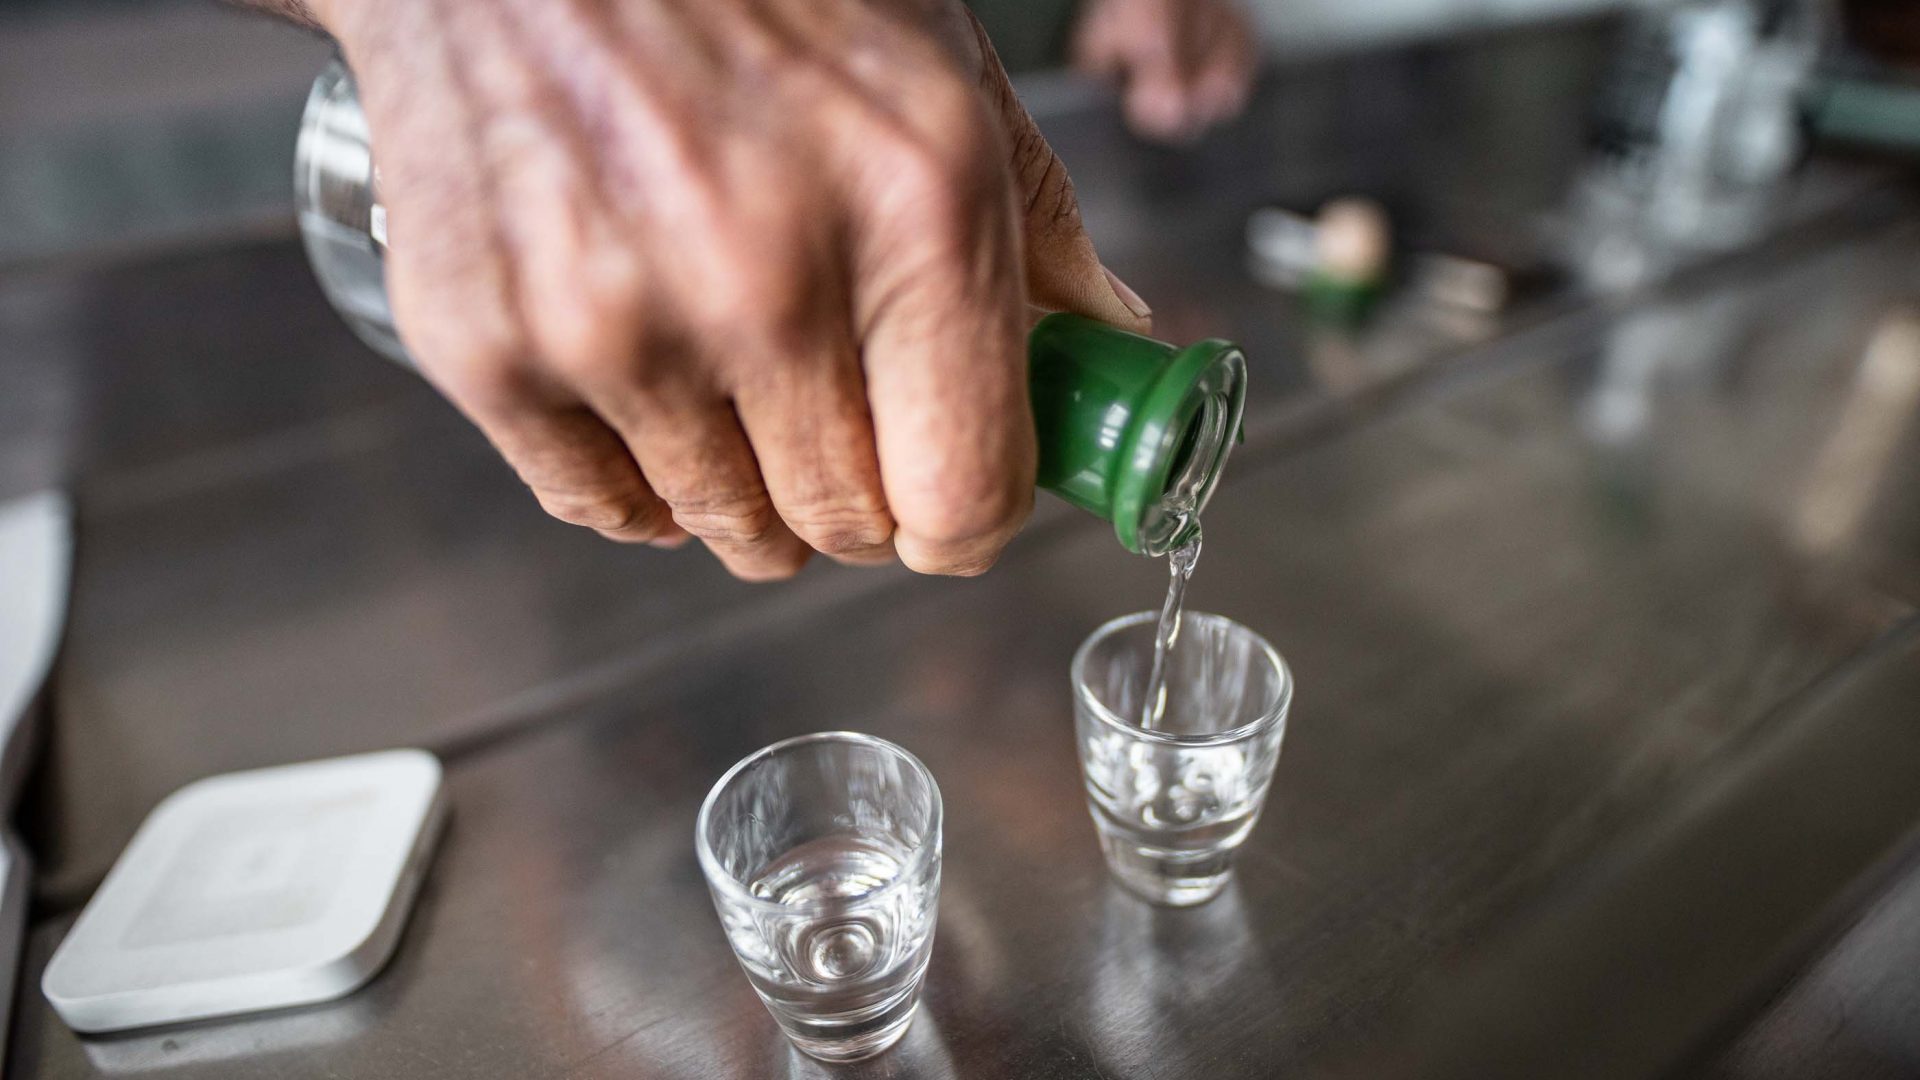 A hand pours a shot of alcohol